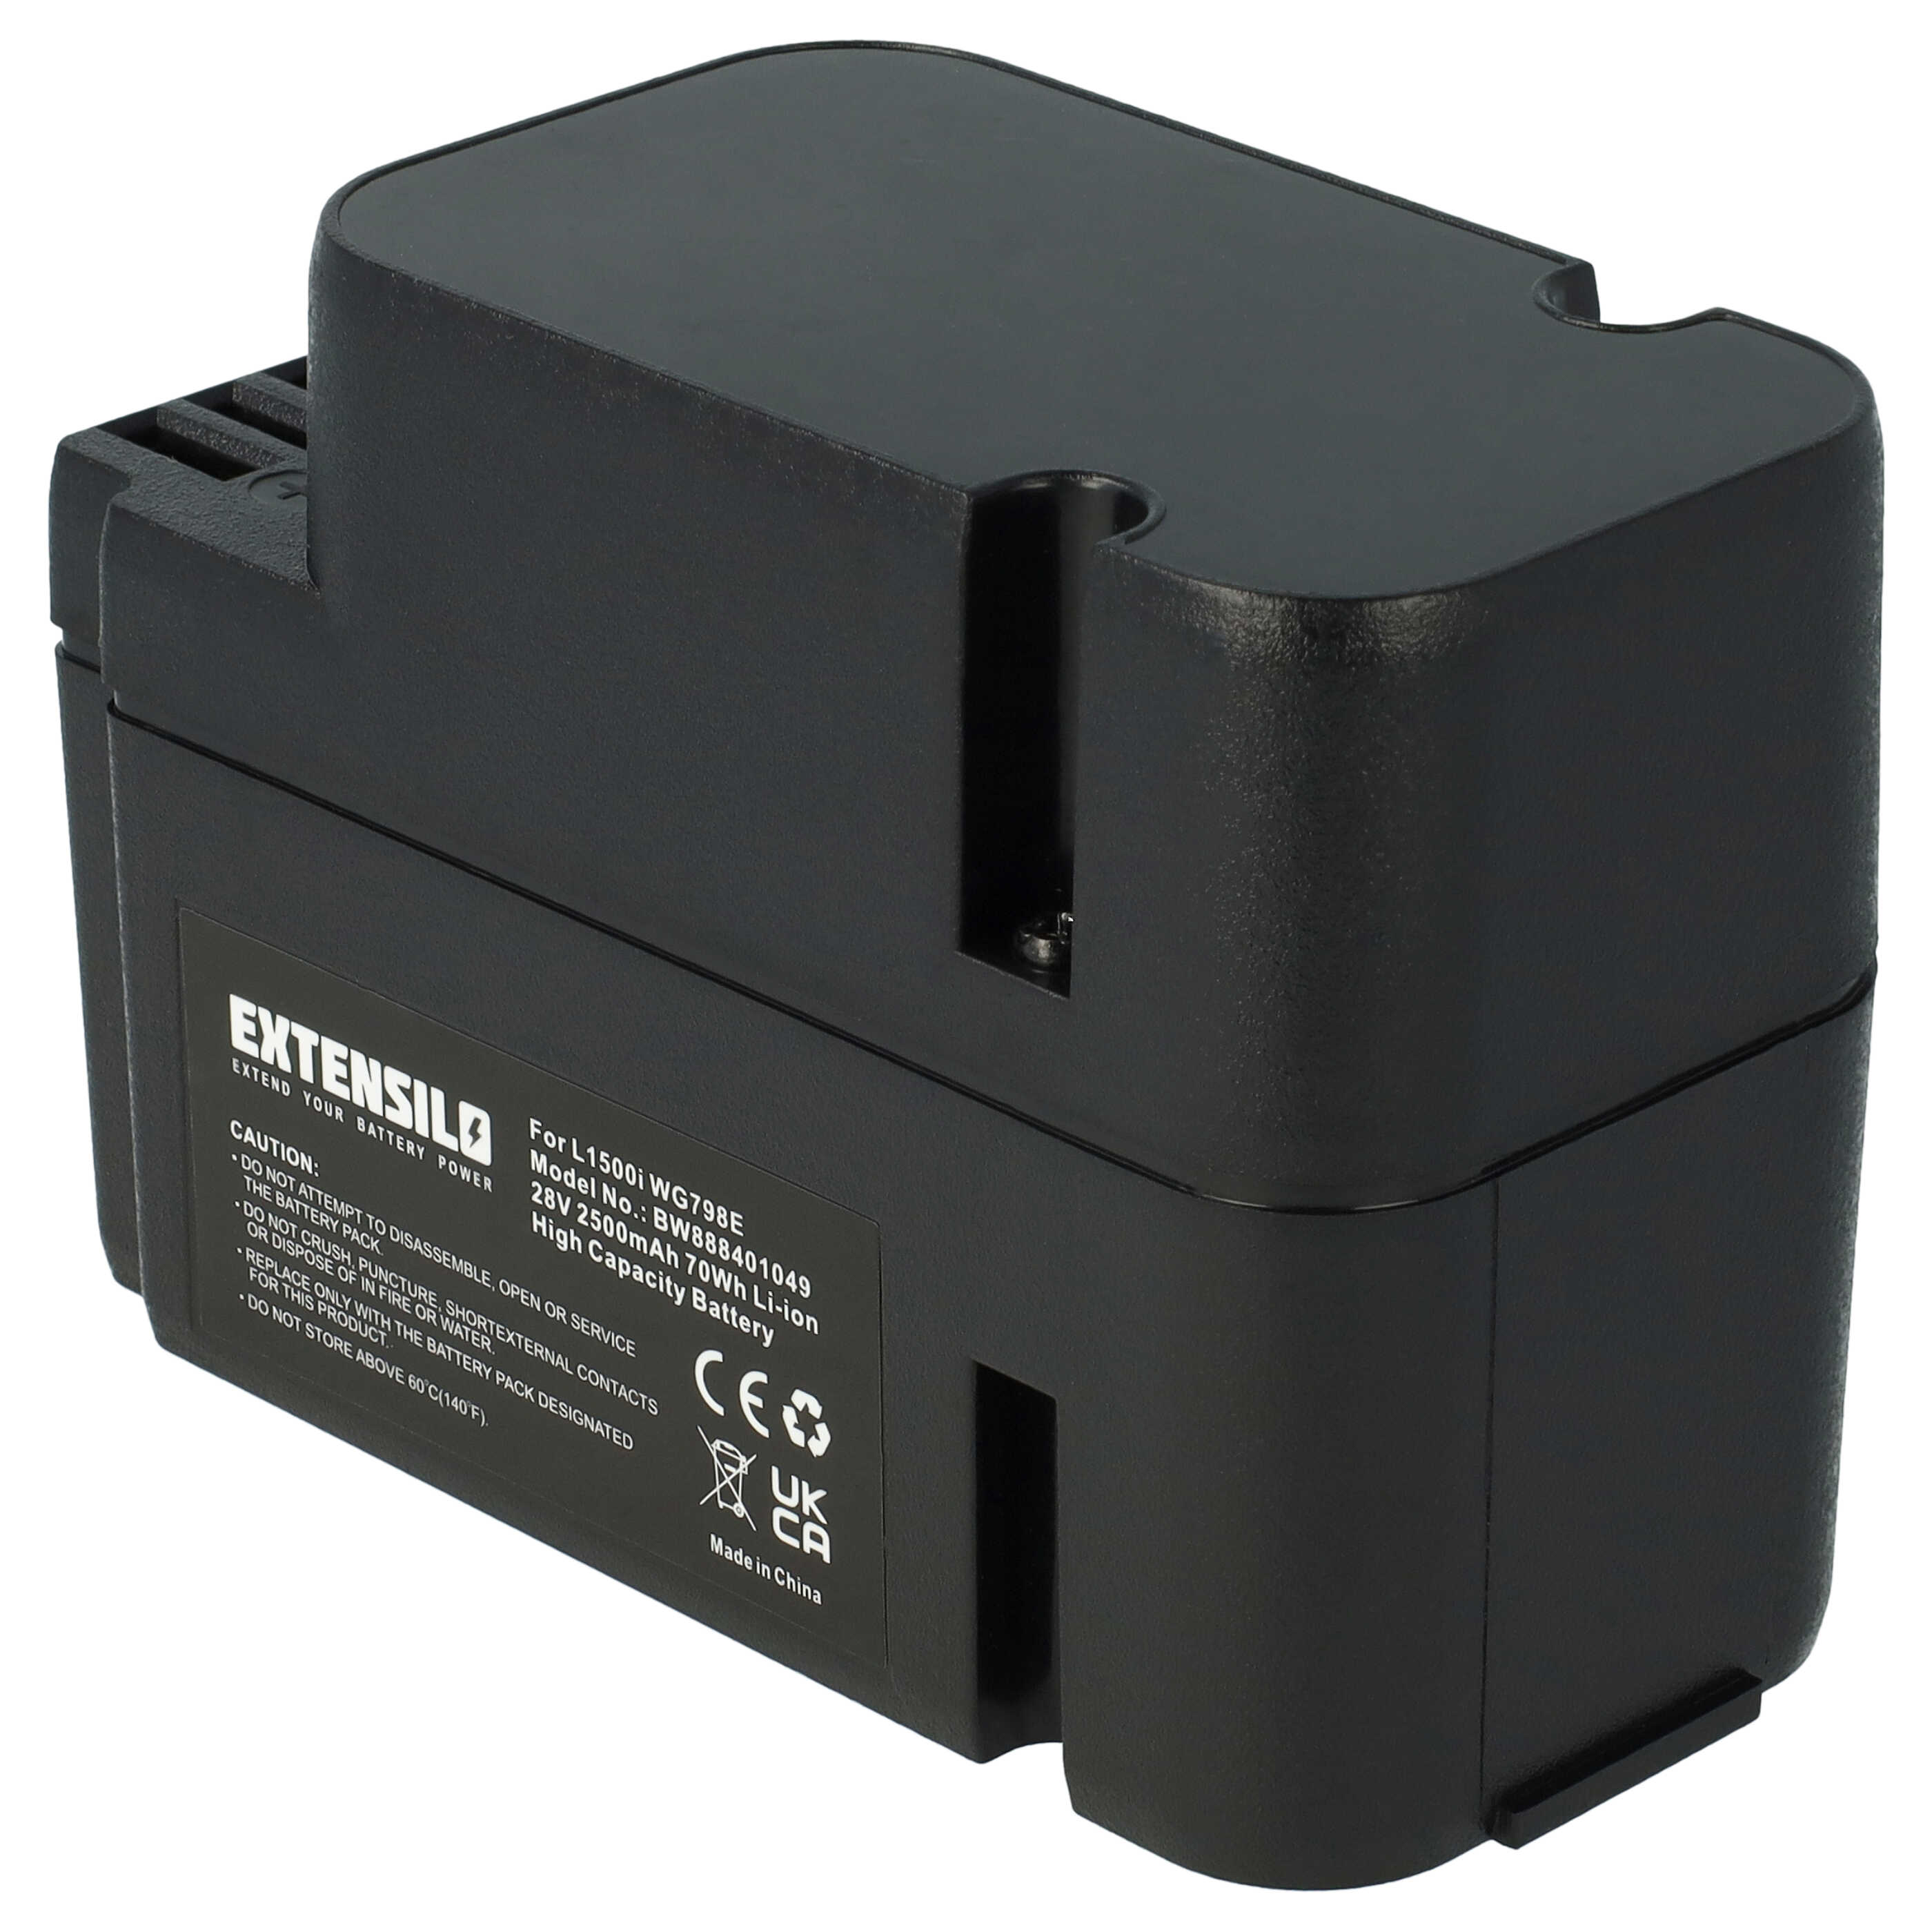 Lawnmower Battery Replacement for Worx - 2500mAh 28V Li-Ion, black